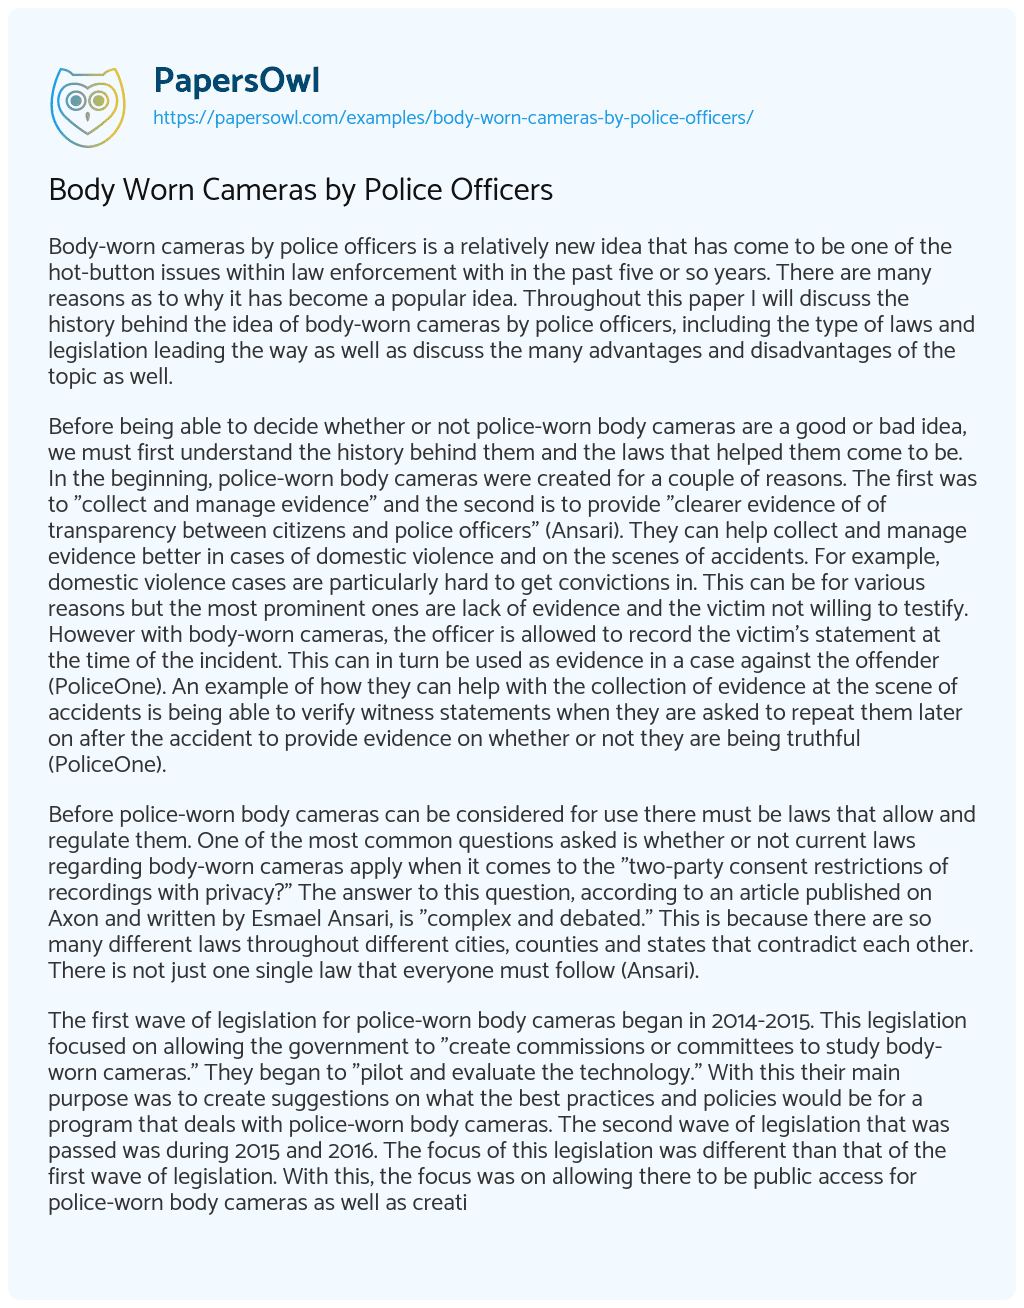 Essay on Body Worn Cameras by Police Officers